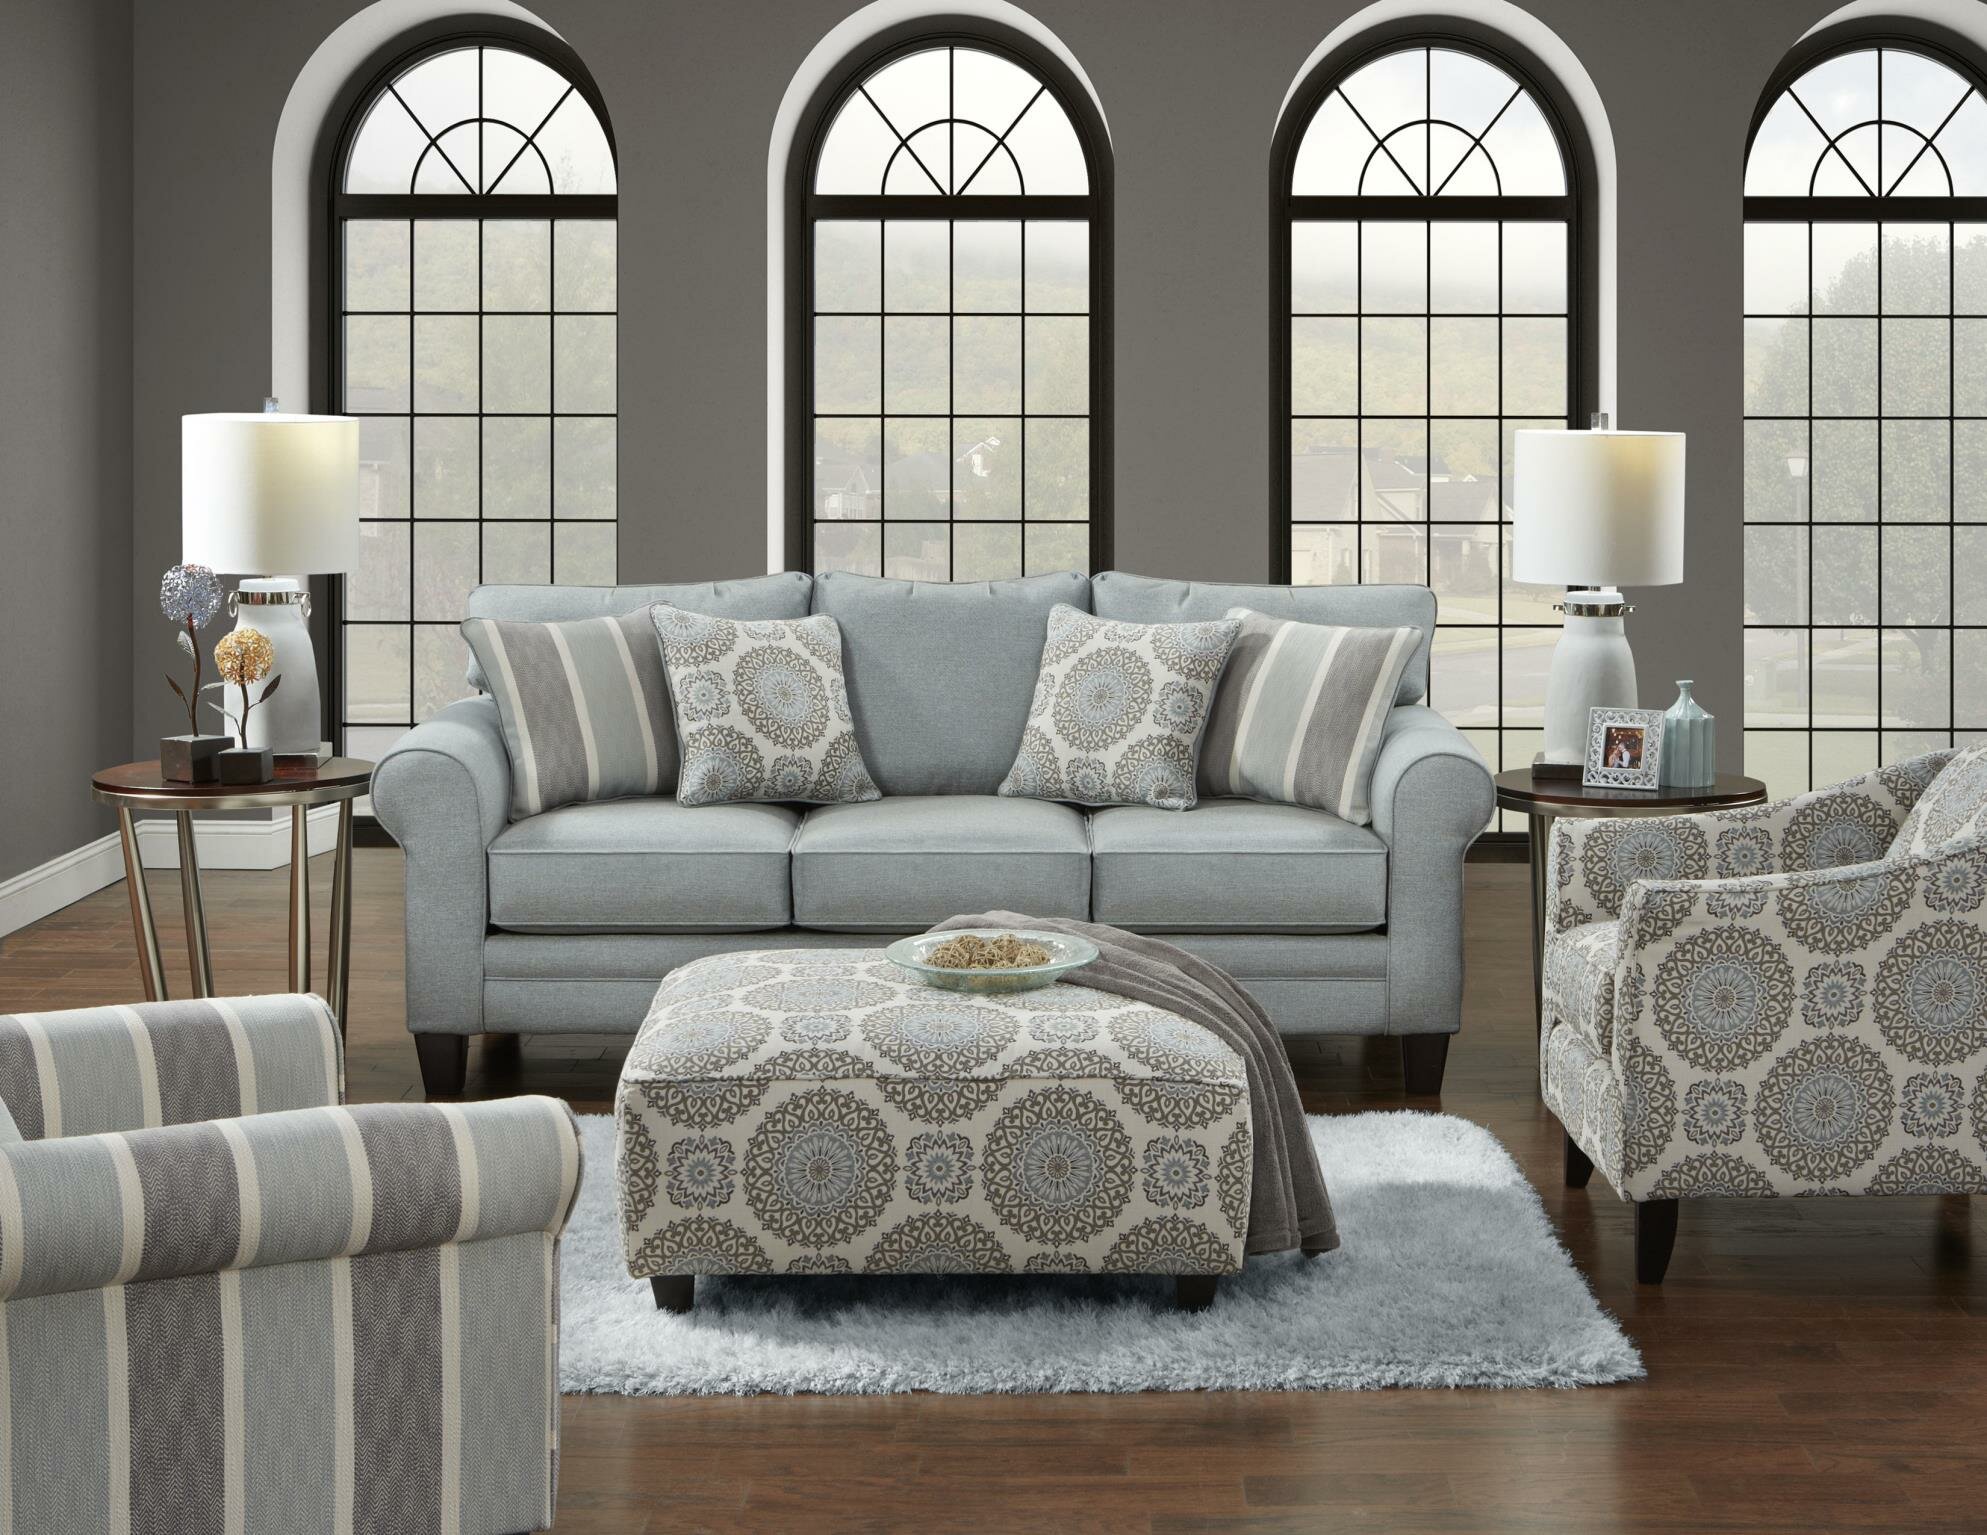 Best Of 52+ Striking Dabria 4 Piece Living Room Set With Many New Styles